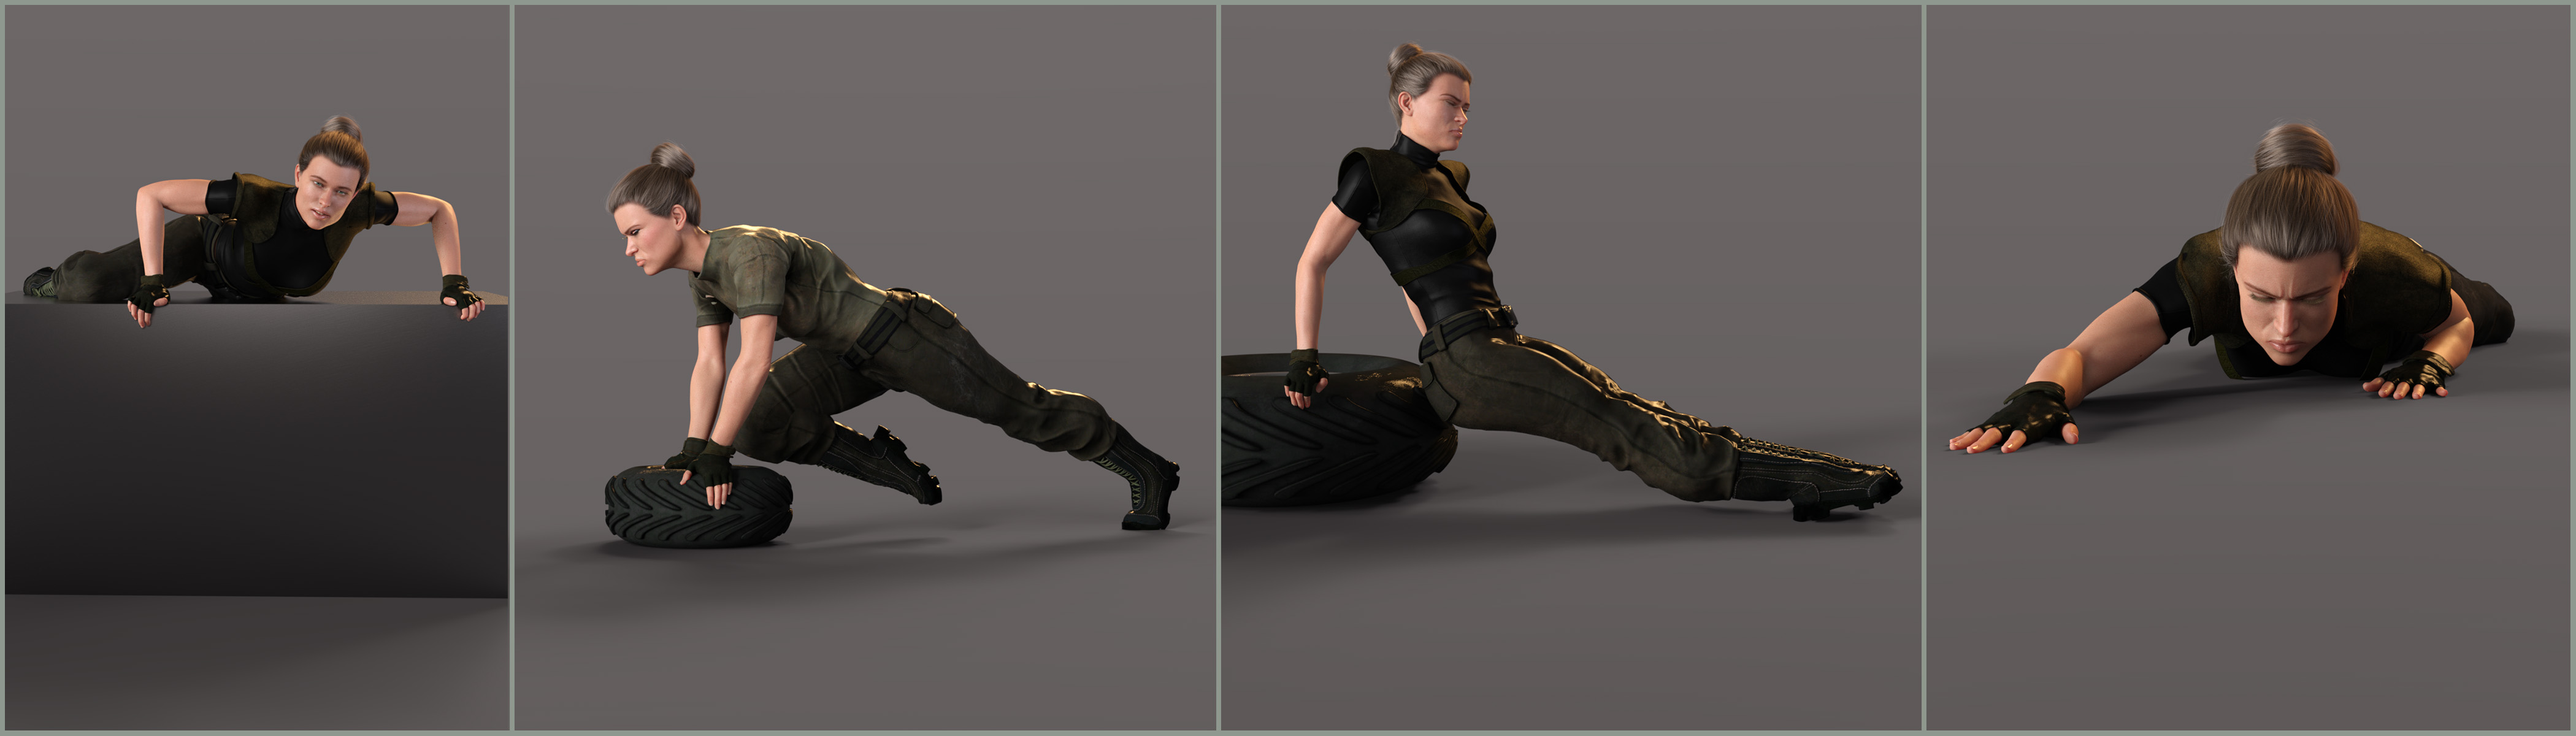 Z Empowered Poses and Expressions for CJ 8 by: Zeddicuss, 3D Models by Daz 3D